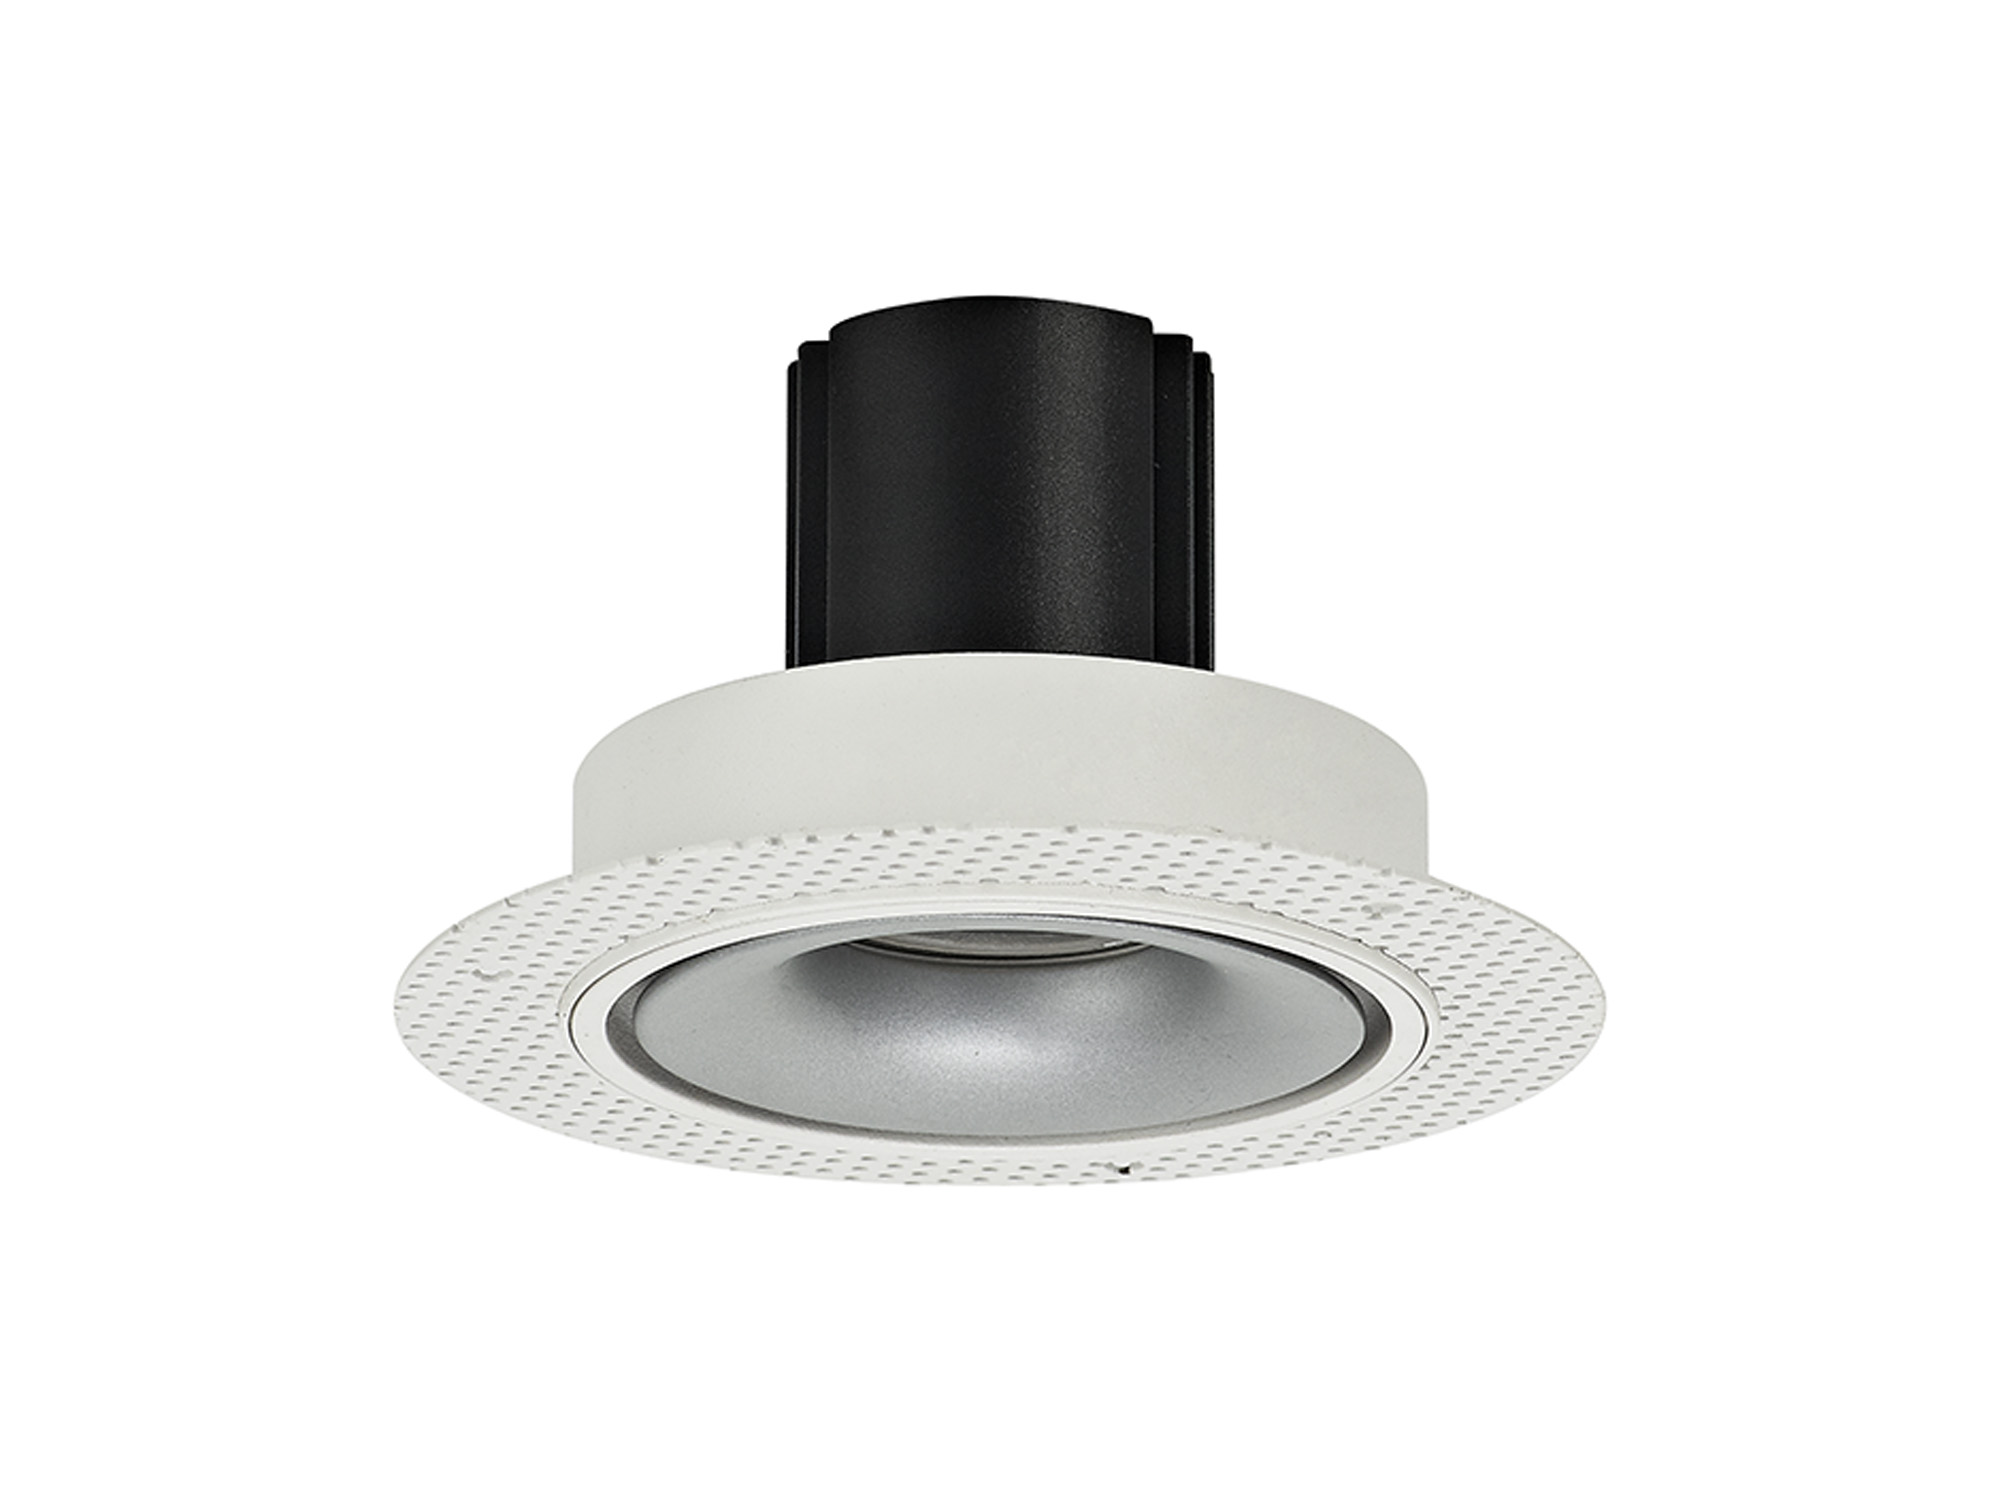 DM202084  Bolor T 9 Tridonic Powered 9W 2700K 770lm 24° CRI>90 LED Engine White/Silver Trimless Fixed Recessed Spotlight, IP20